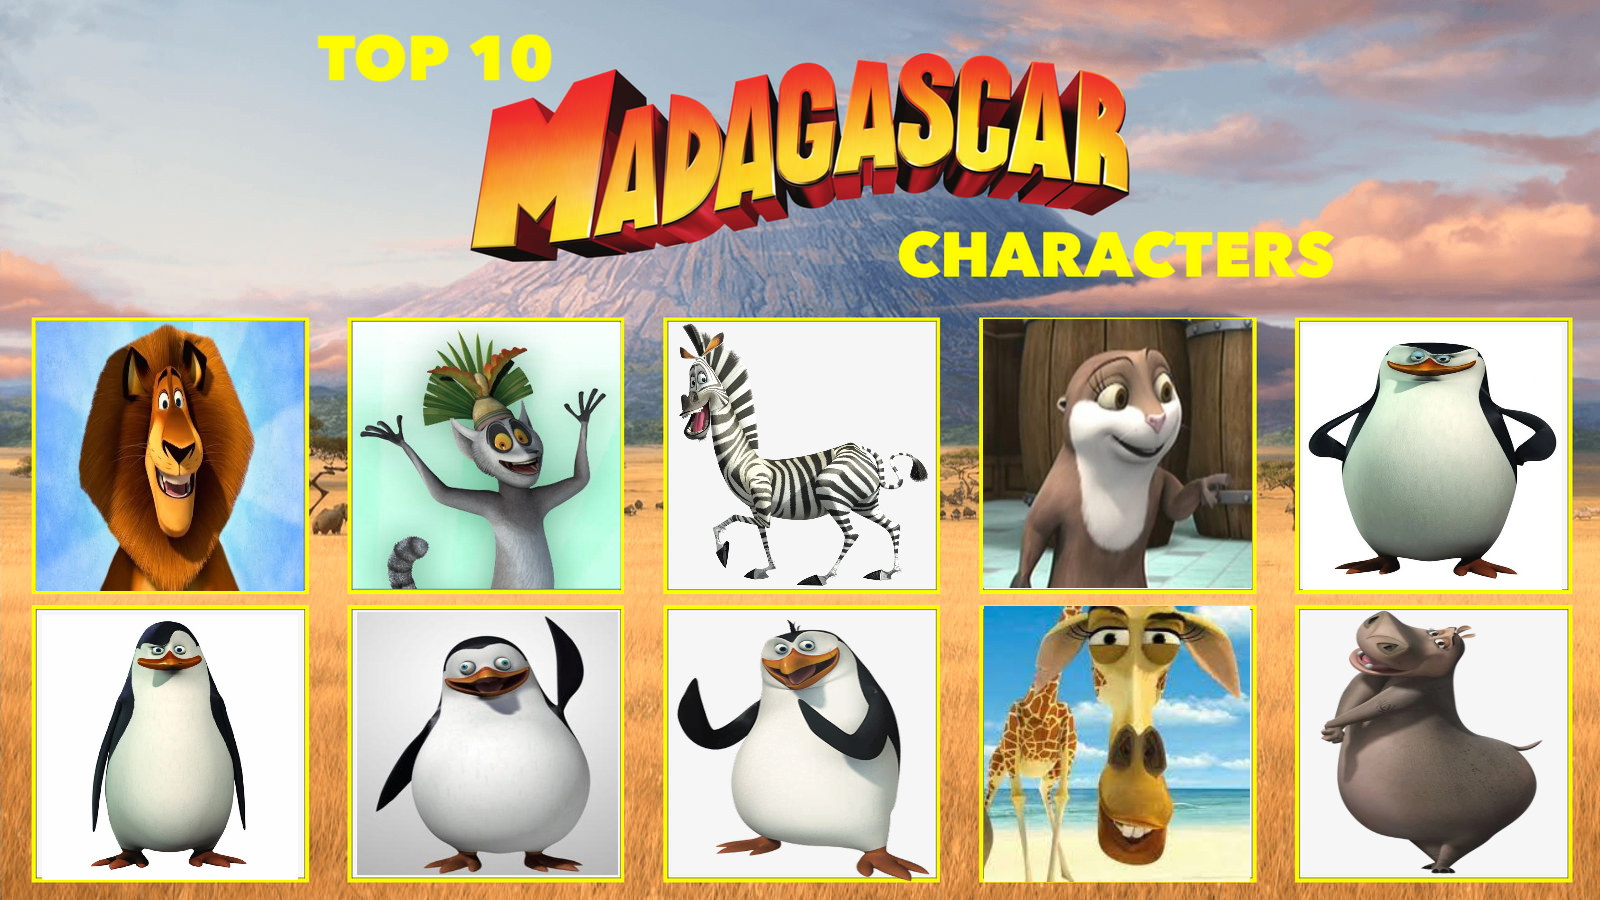 My Top 10 Favorite Madagascar Characters by StanMarshFan20 on DeviantArt